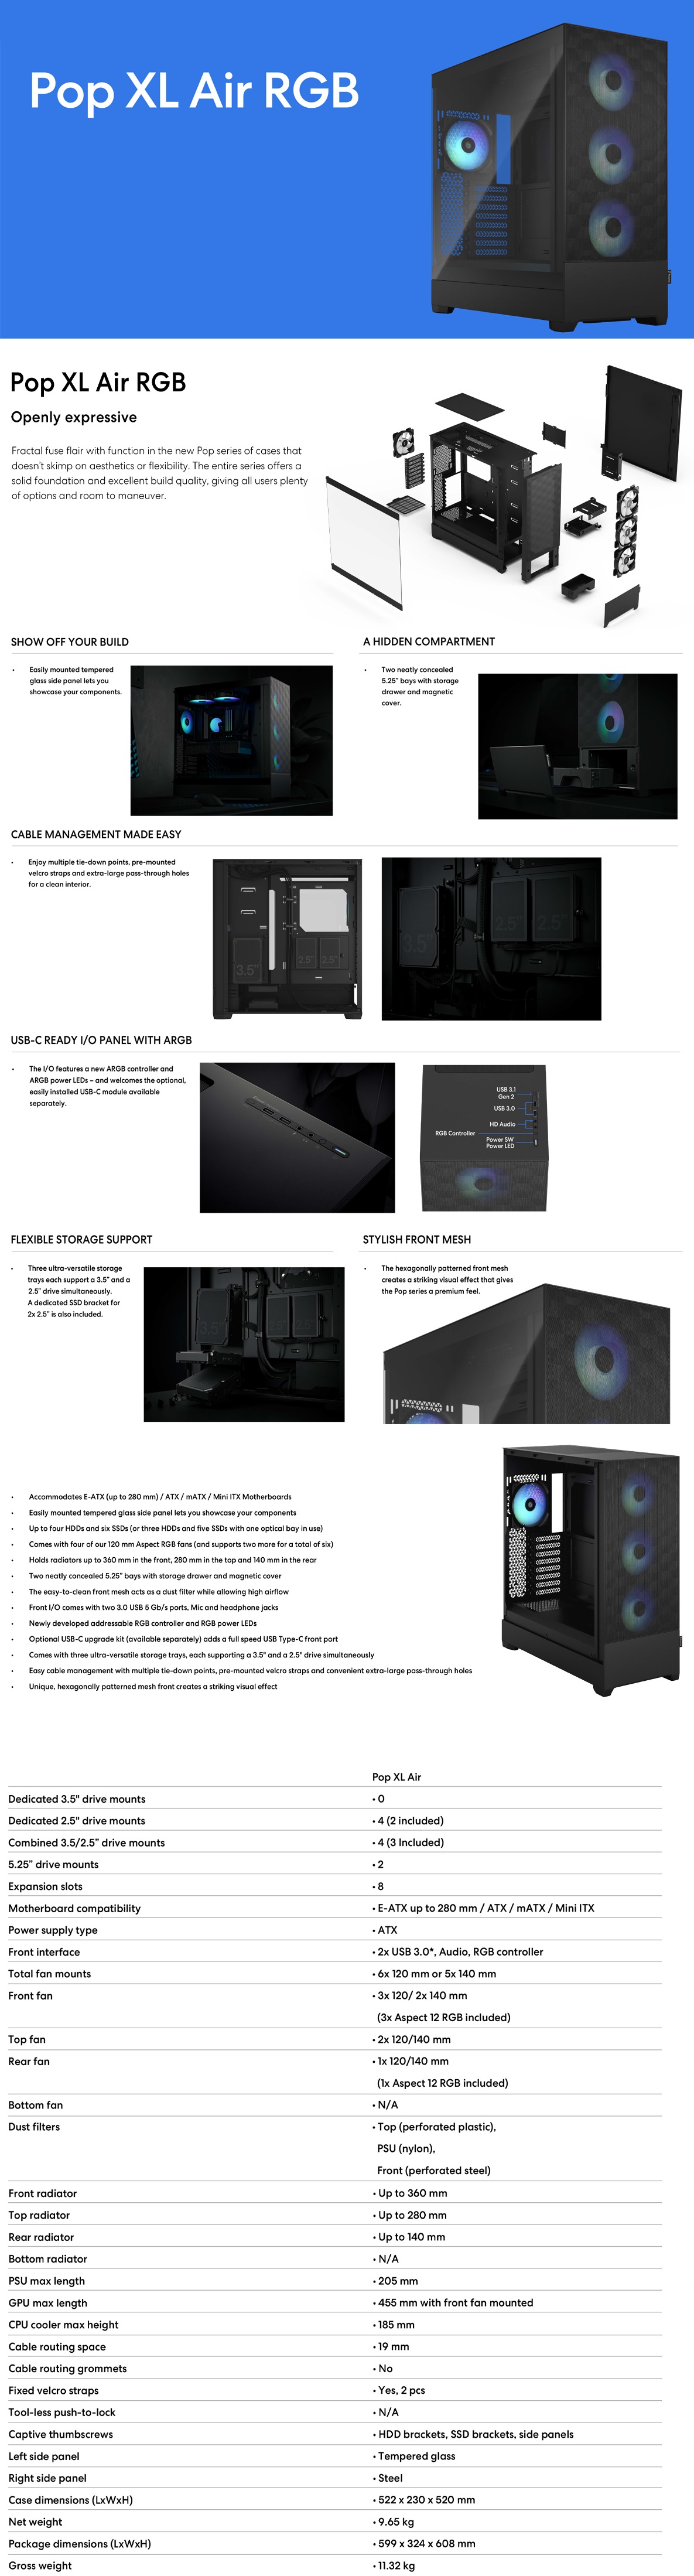 A large marketing image providing additional information about the product Fractal Design Pop XL Air RGB TG Clear Tint Full Tower Case - White - Additional alt info not provided